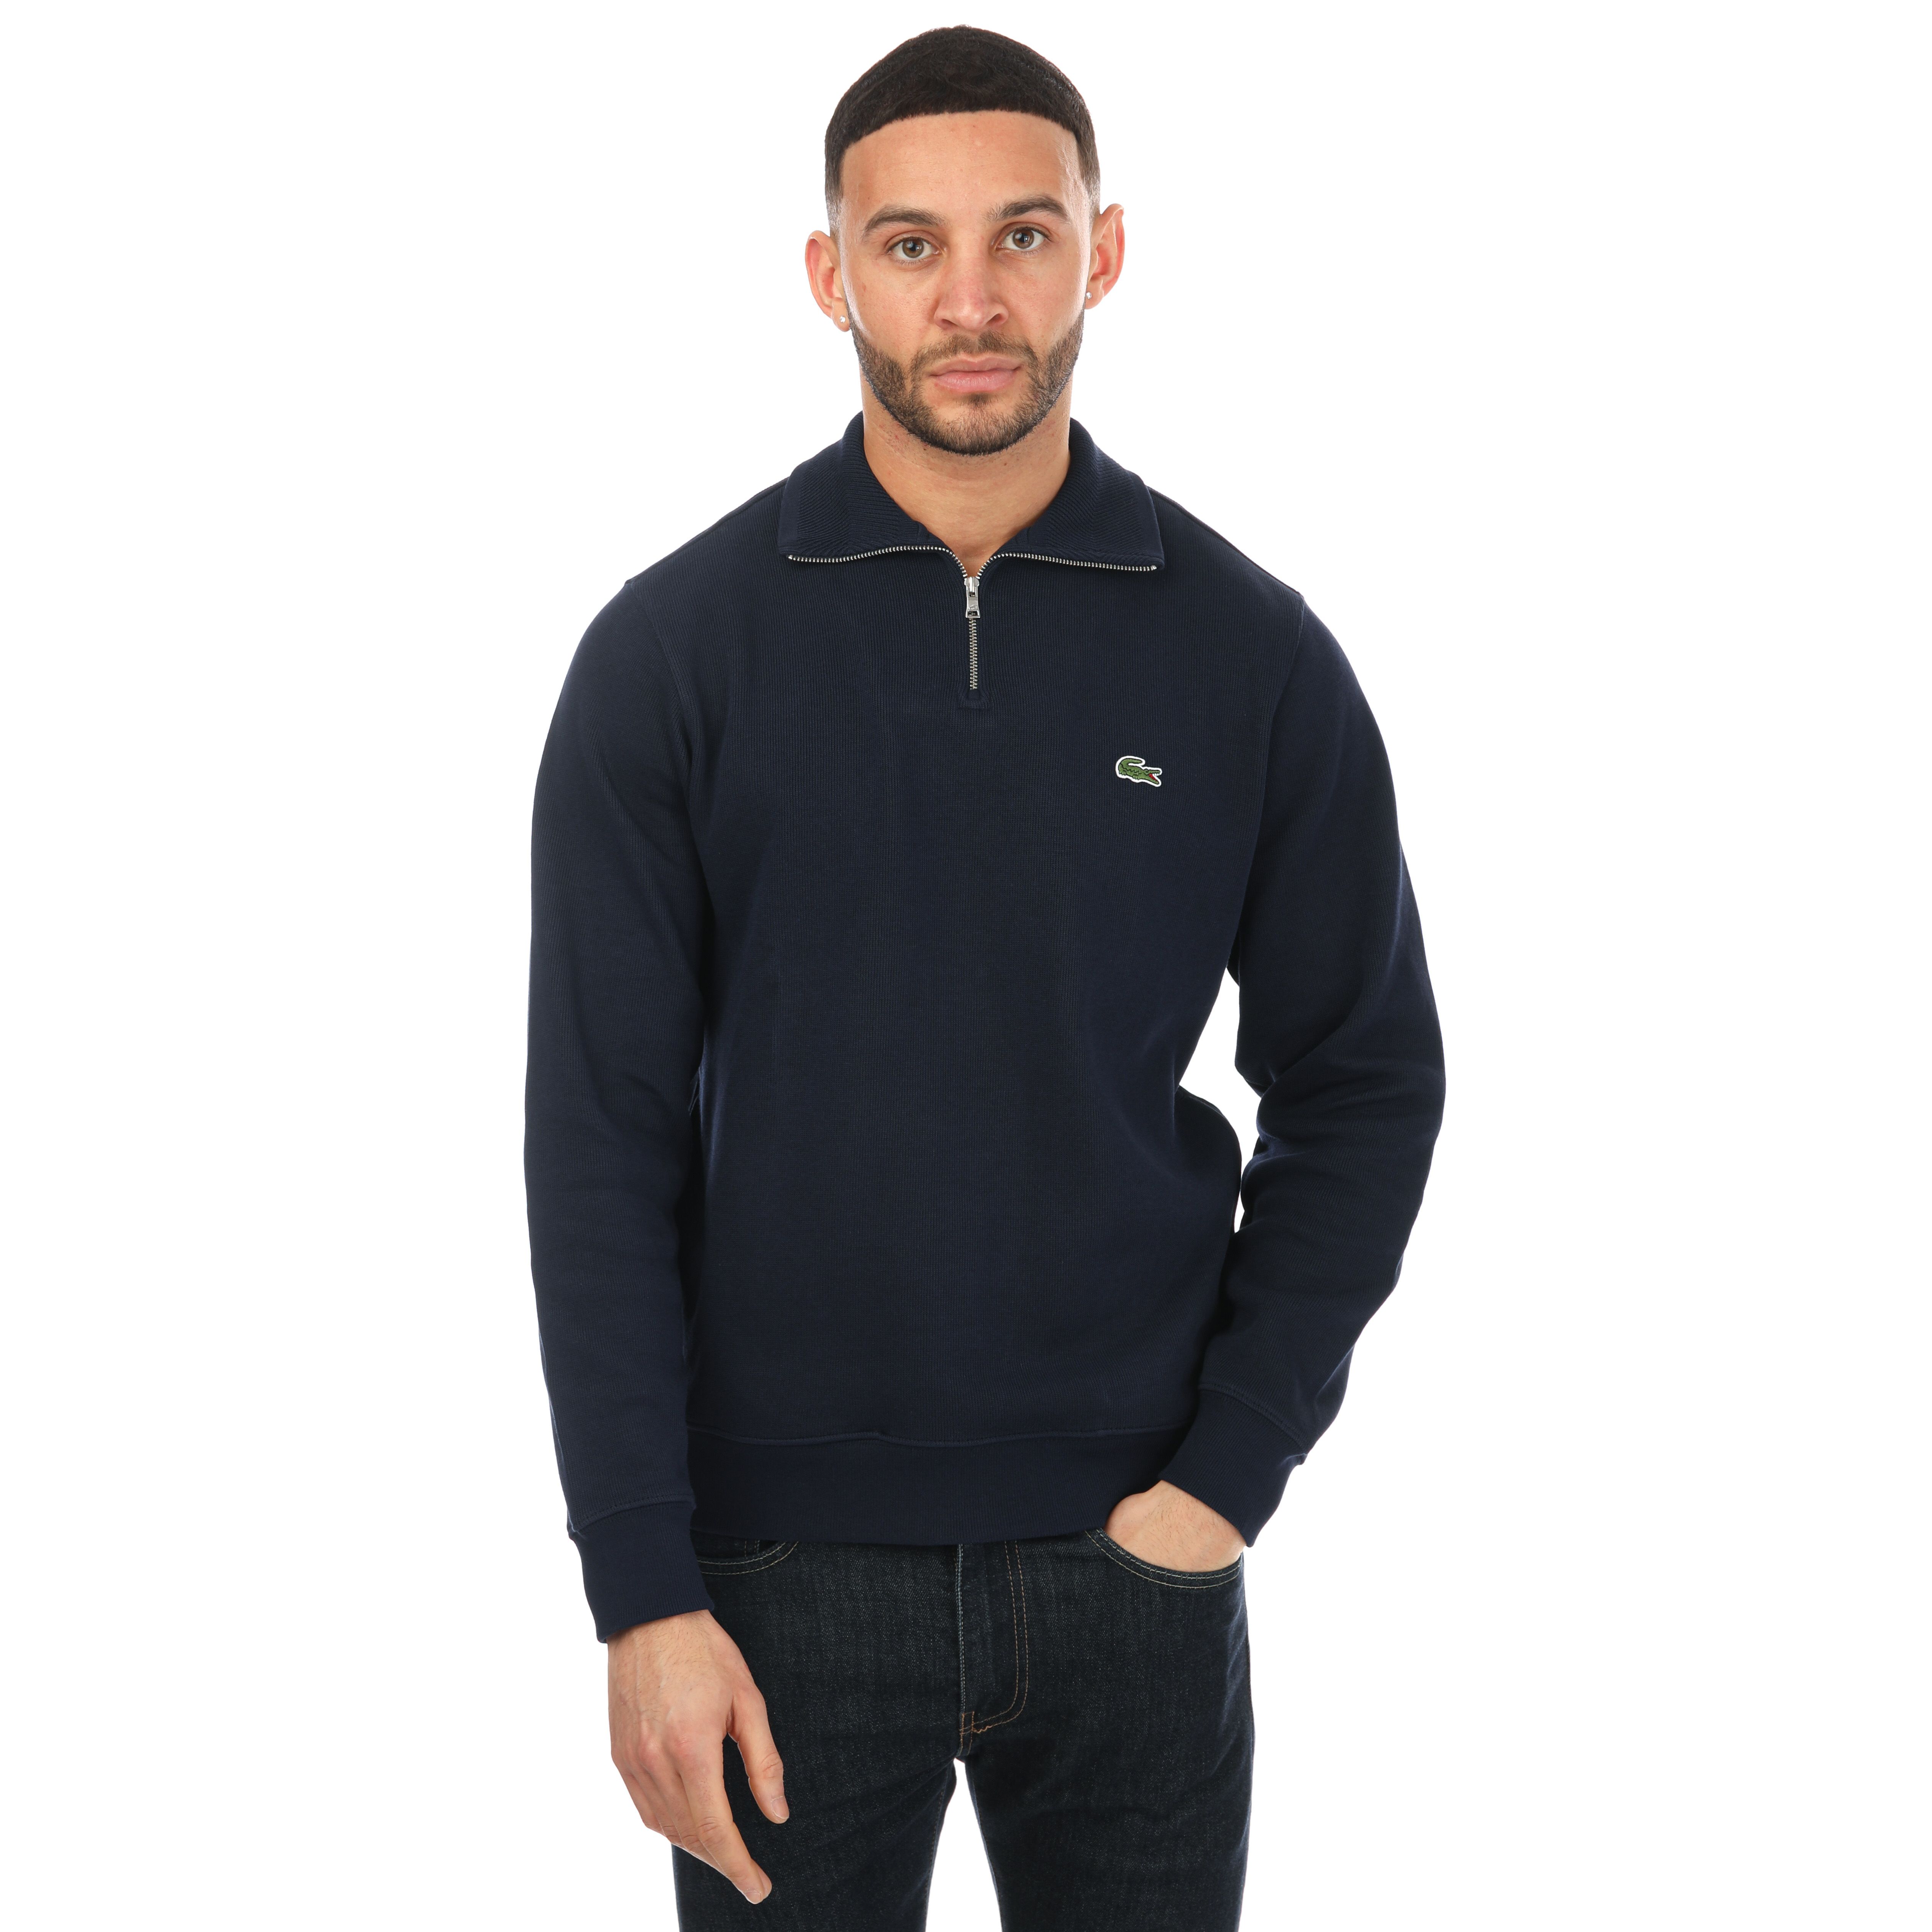 Lacoste Mens Zippered Stand-Up Collar Cotton Sweatshirt Size Medium in Blue